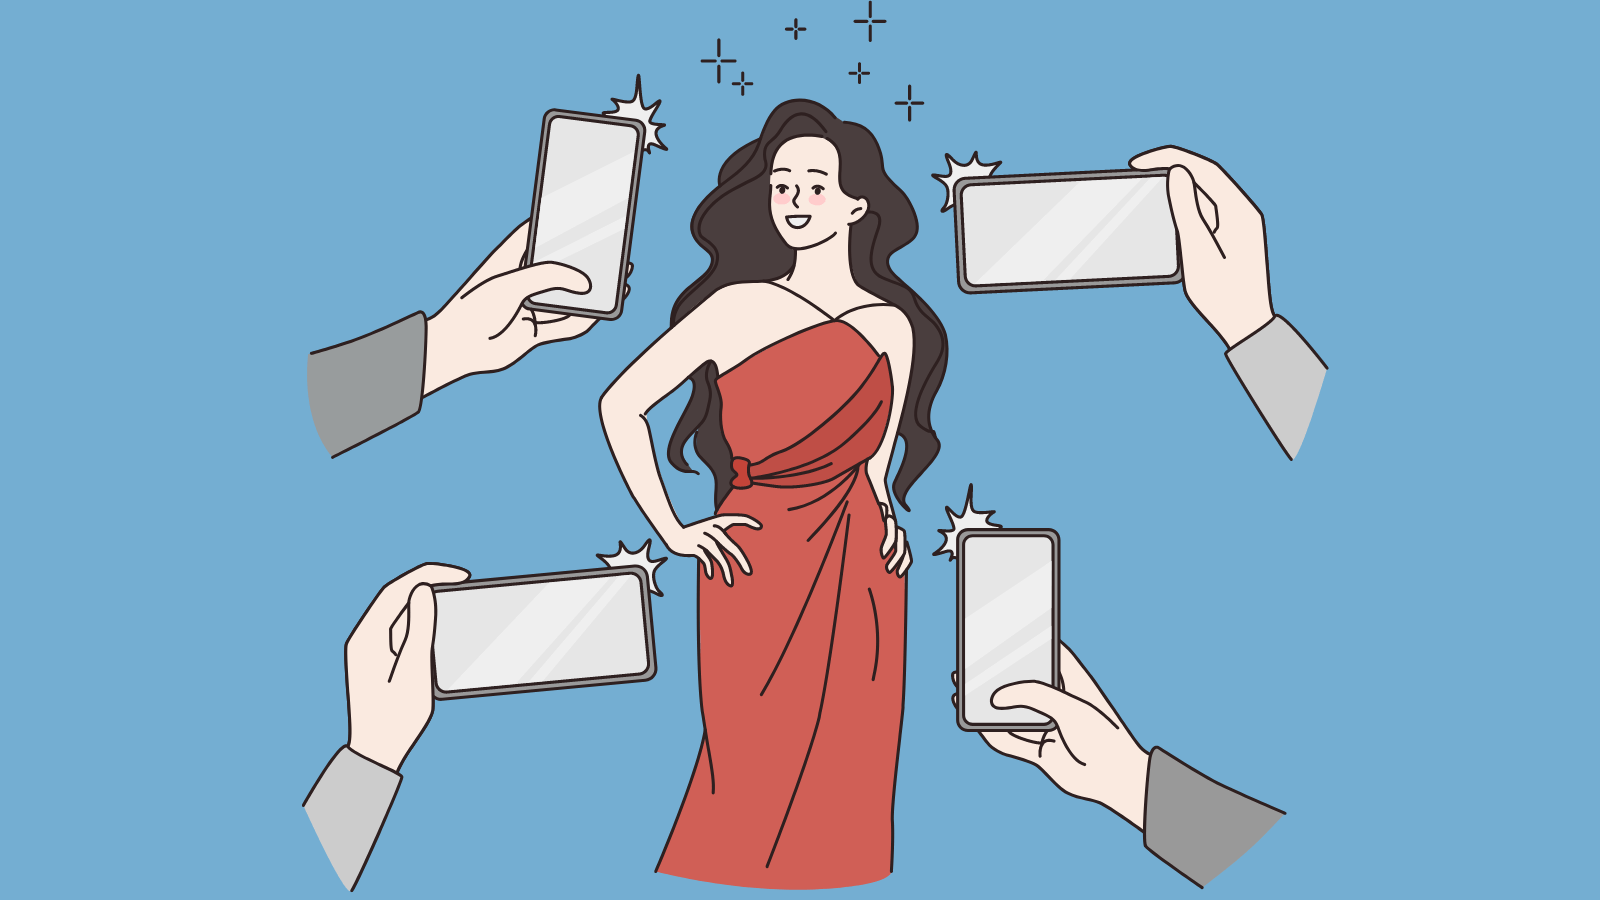 Four disembodied arms taking photos of a glamorous woman with their smartphones